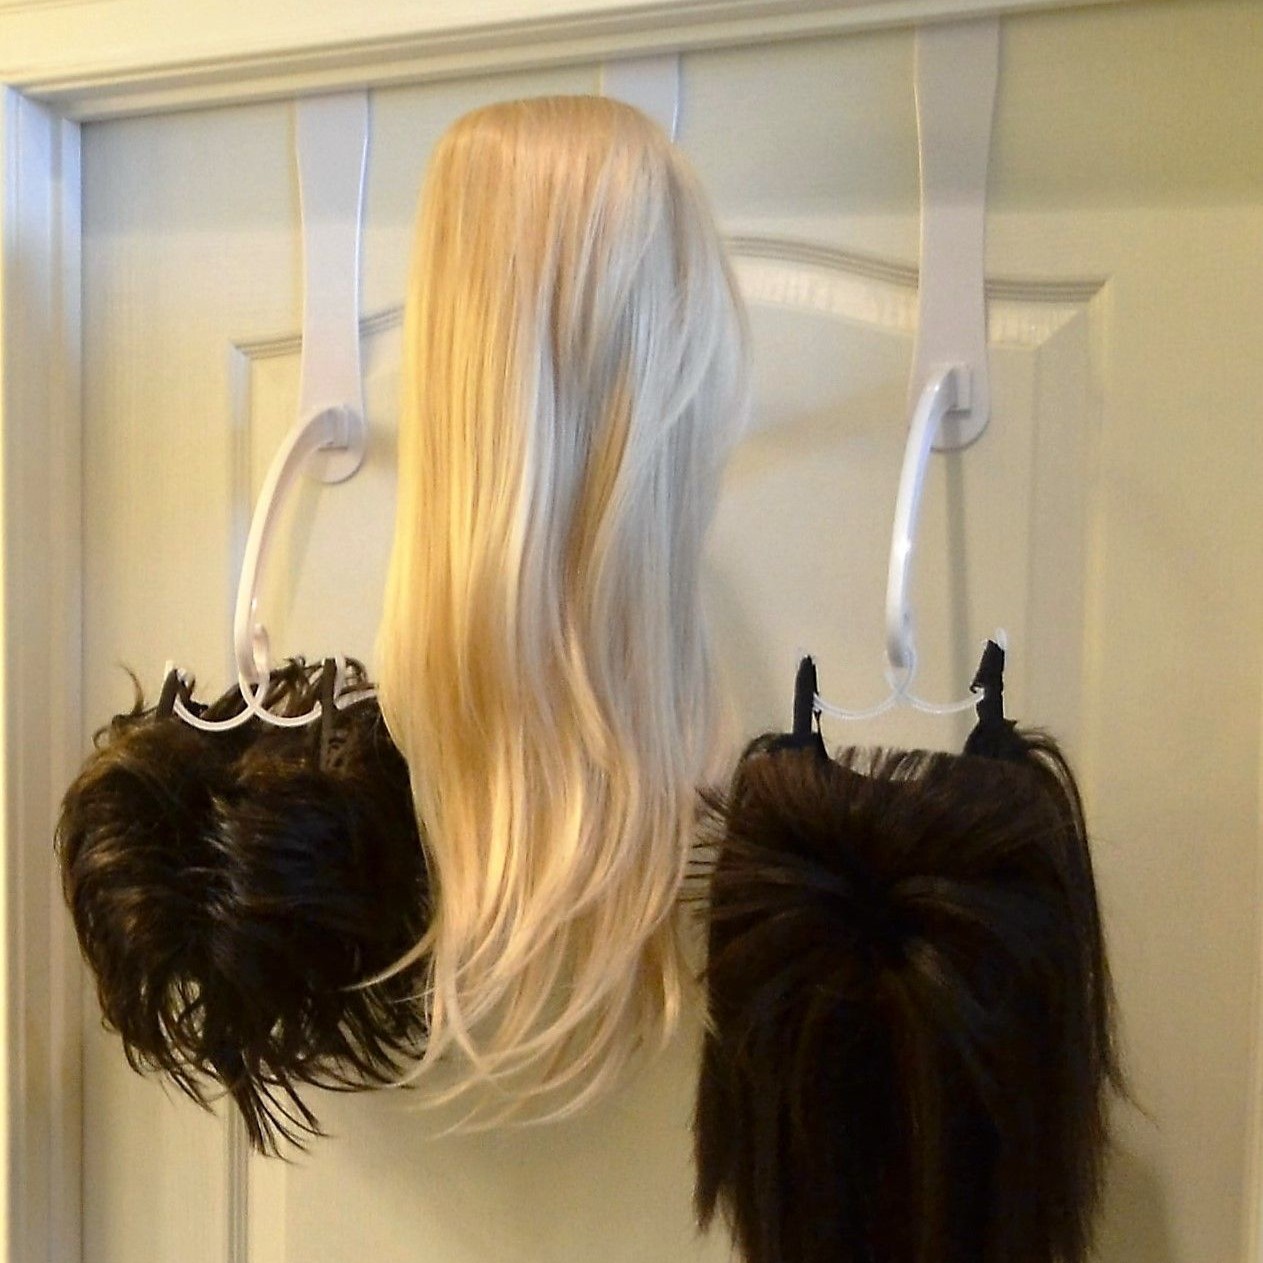 How To Store A Wig Without A Head